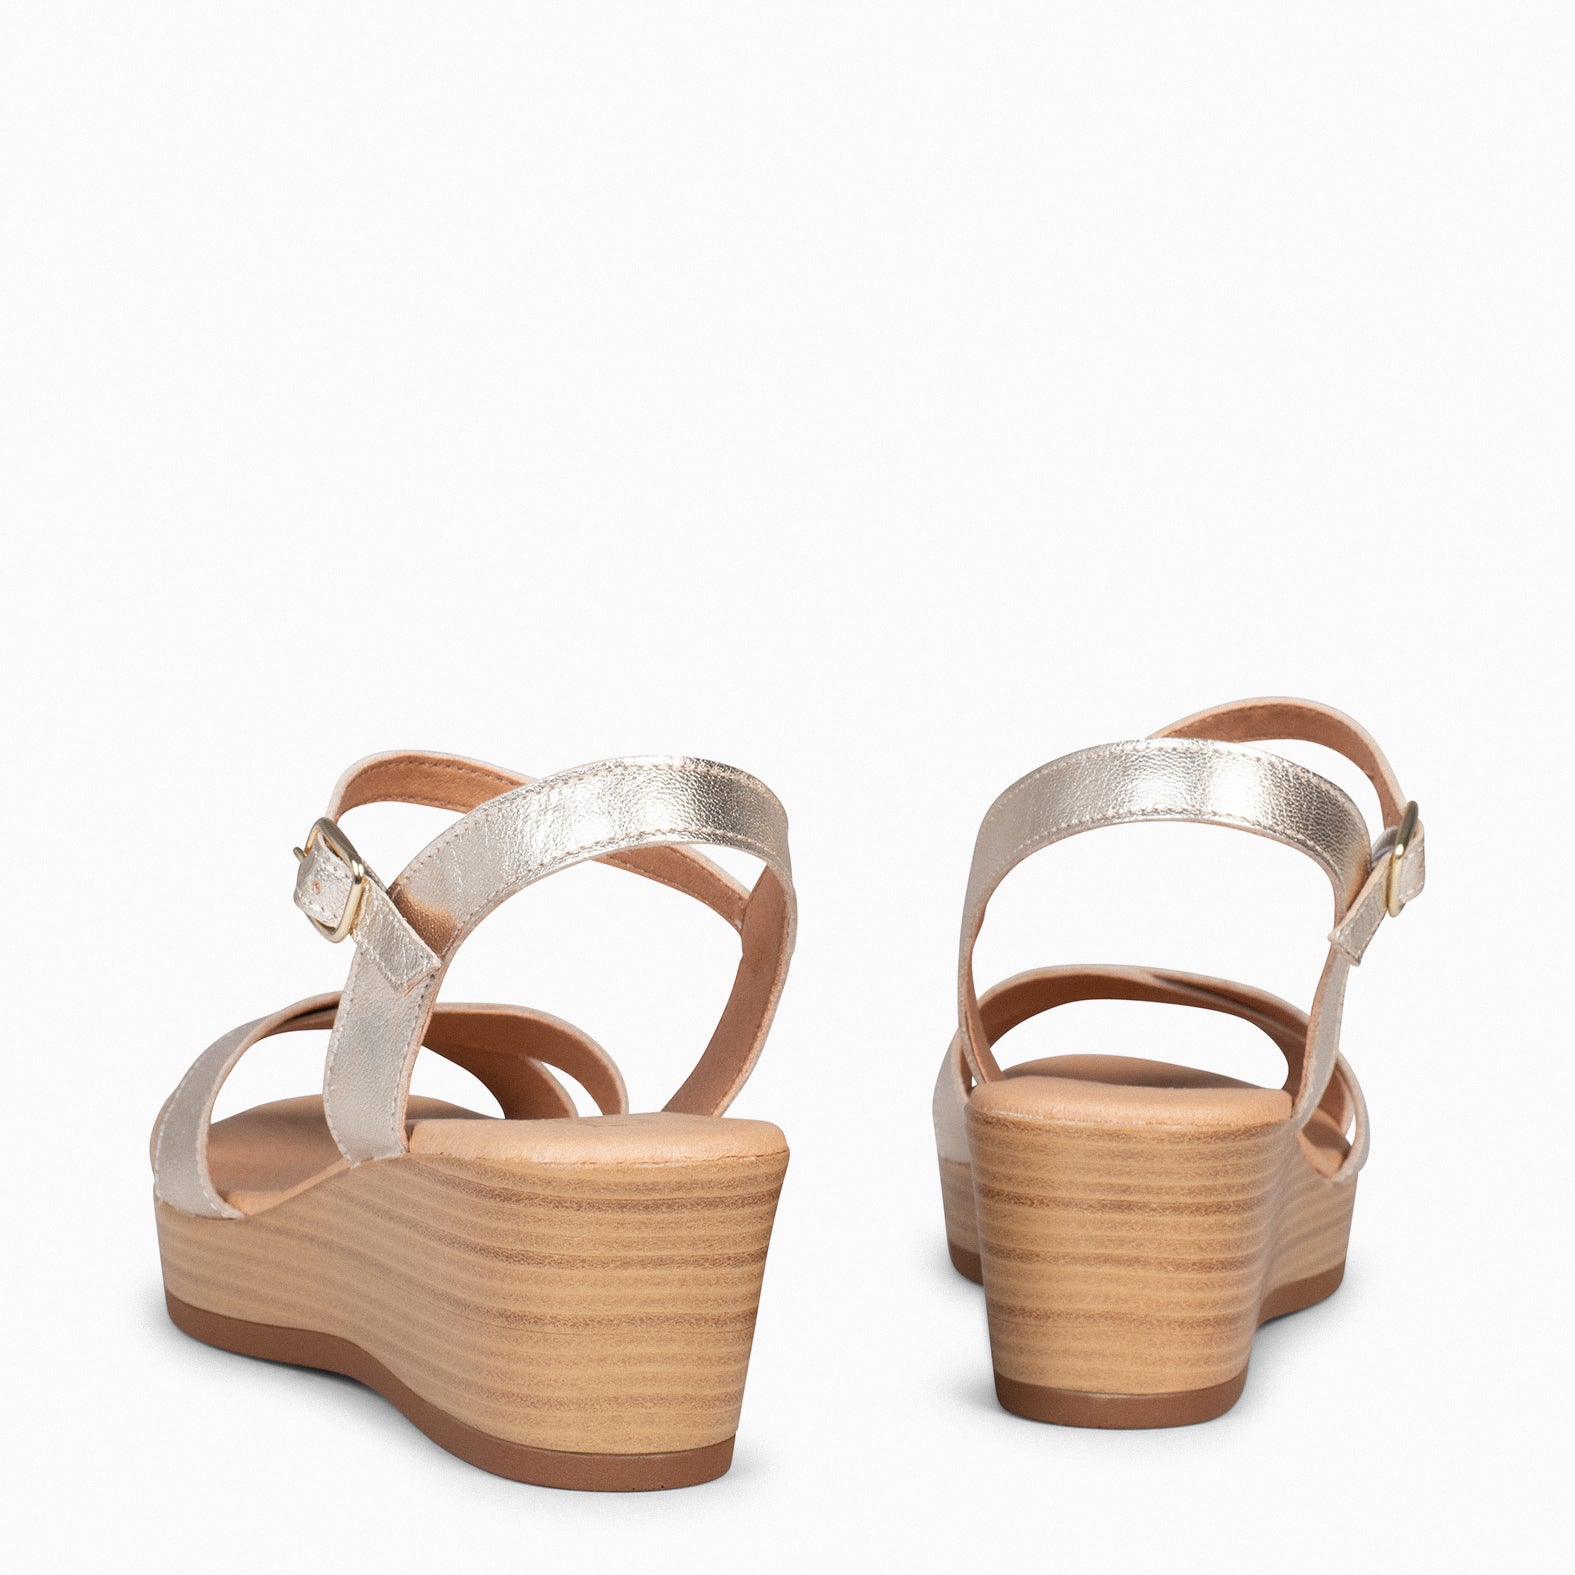 MAR – GOLD WEDGE SHOES